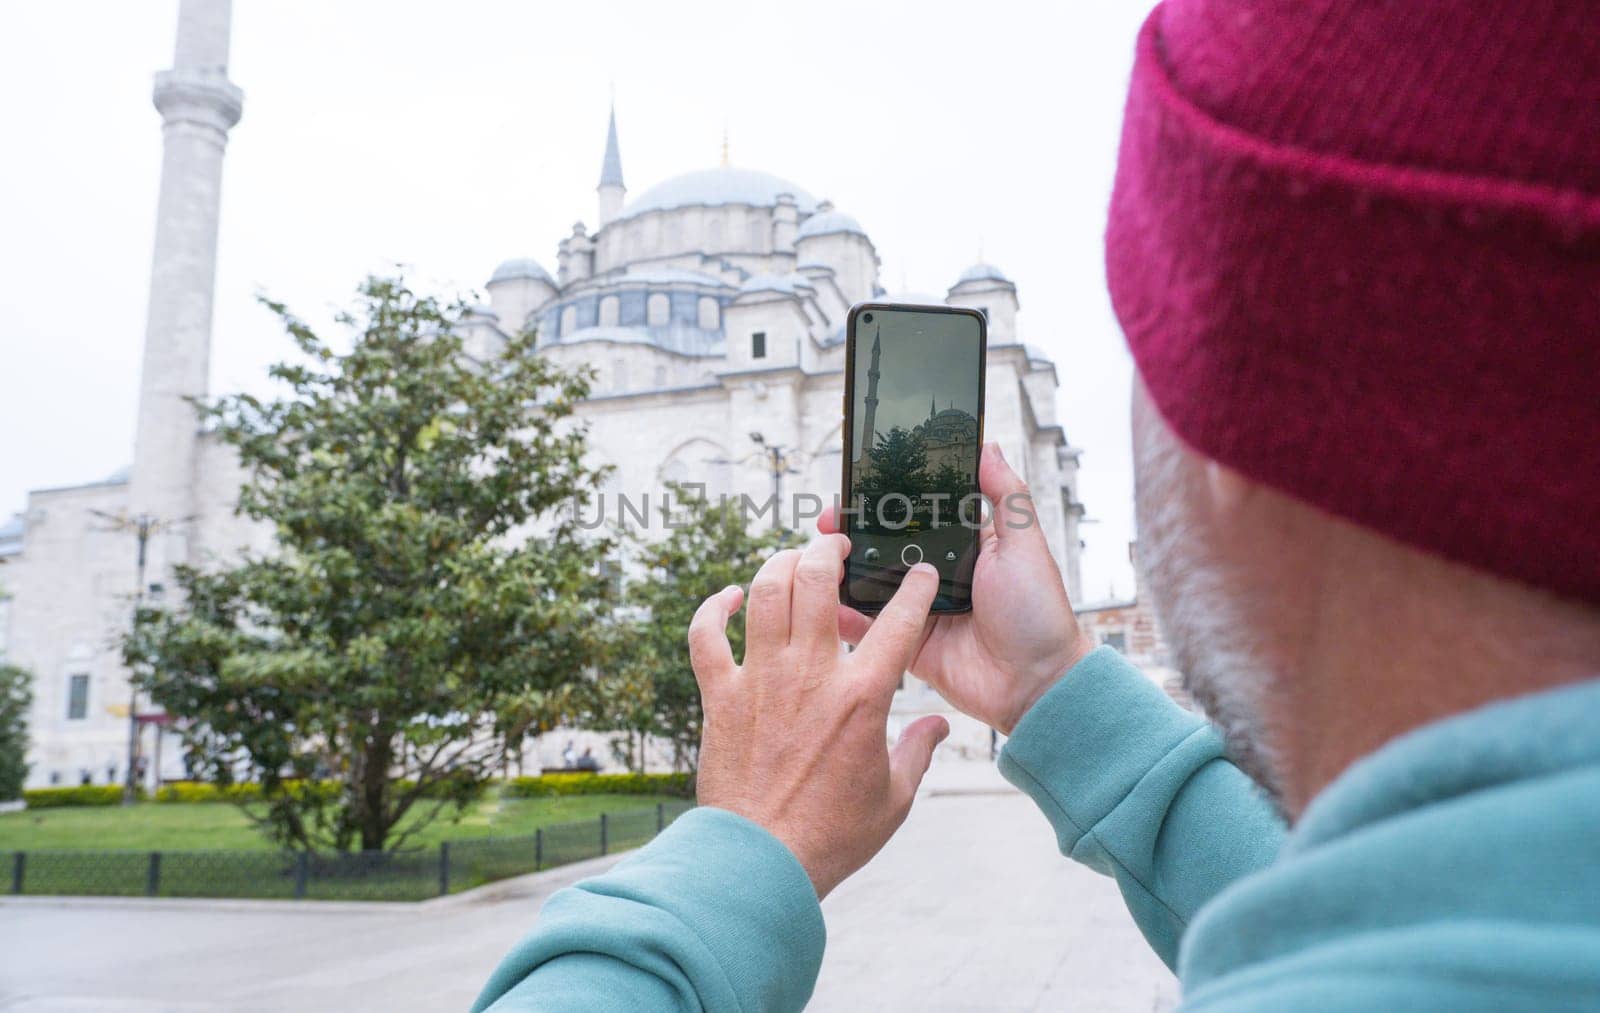 A male tourist takes a photo of the Fatih Mosque in Istanbul, Turkey as a keepsake. by Ekaterina34